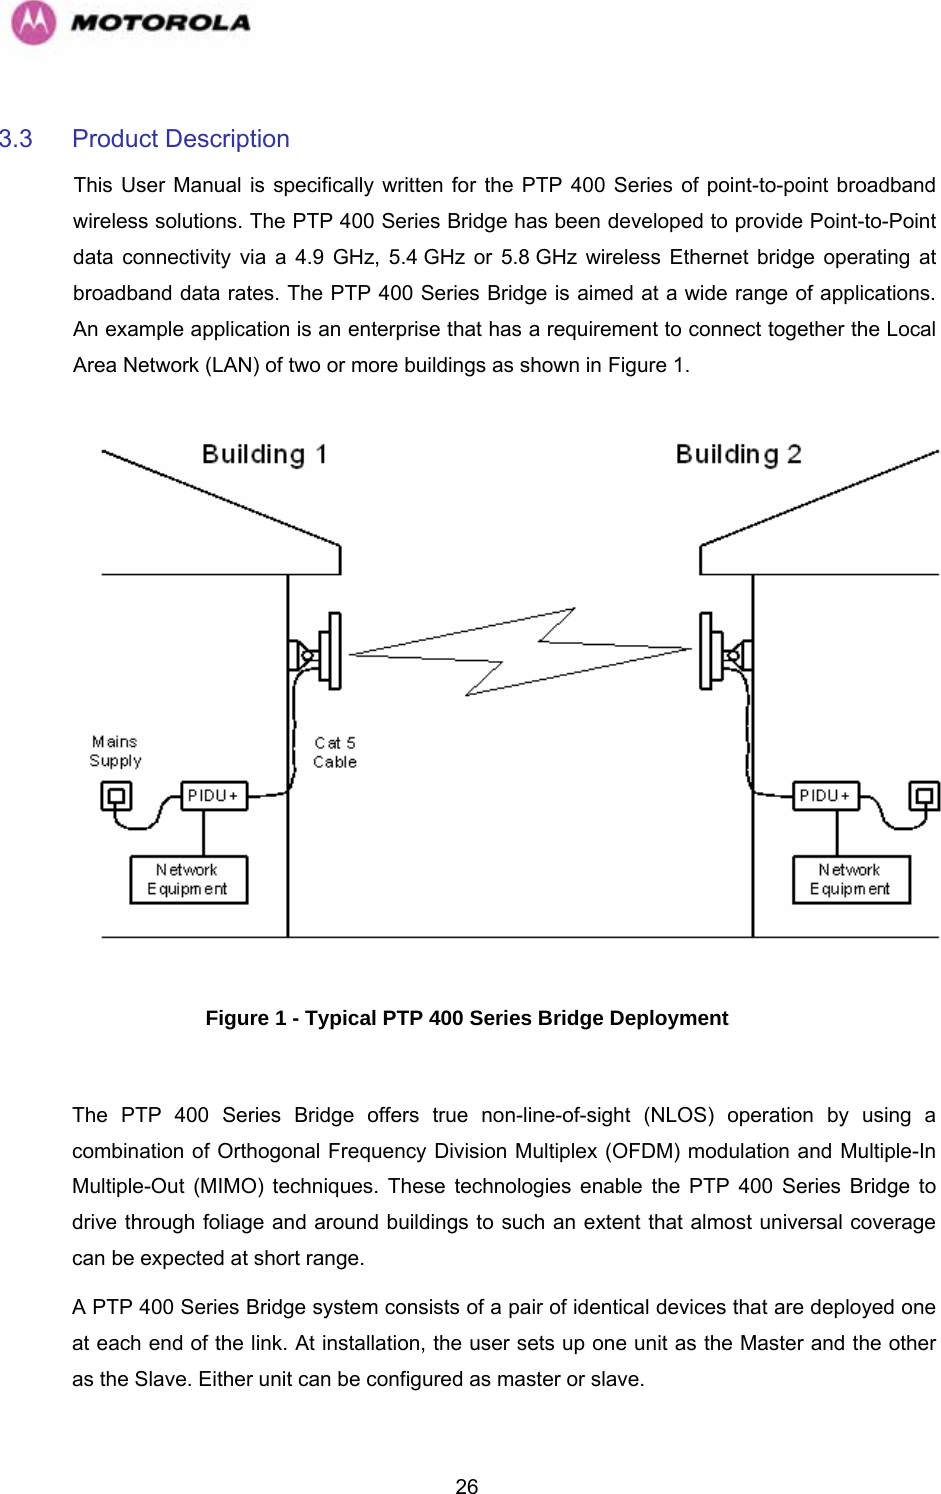   263.3 Product Description  This User Manual is specifically written for the PTP 400 Series of point-to-point broadband wireless solutions. The PTP 400 Series Bridge has been developed to provide Point-to-Point data connectivity via a 4.9 GHz, 5.4 GHz or 5.8 GHz wireless Ethernet bridge operating at broadband data rates. The PTP 400 Series Bridge is aimed at a wide range of applications. An example application is an enterprise that has a requirement to connect together the Local Area Network (LAN) of two or more buildings as shown in Figure 1.    Figure 1 - Typical PTP 400 Series Bridge Deployment  The PTP 400 Series Bridge offers true non-line-of-sight (NLOS) operation by using a combination of Orthogonal Frequency Division Multiplex (OFDM) modulation and Multiple-In Multiple-Out (MIMO) techniques. These technologies enable the PTP 400 Series Bridge to drive through foliage and around buildings to such an extent that almost universal coverage can be expected at short range.  A PTP 400 Series Bridge system consists of a pair of identical devices that are deployed one at each end of the link. At installation, the user sets up one unit as the Master and the other as the Slave. Either unit can be configured as master or slave.  